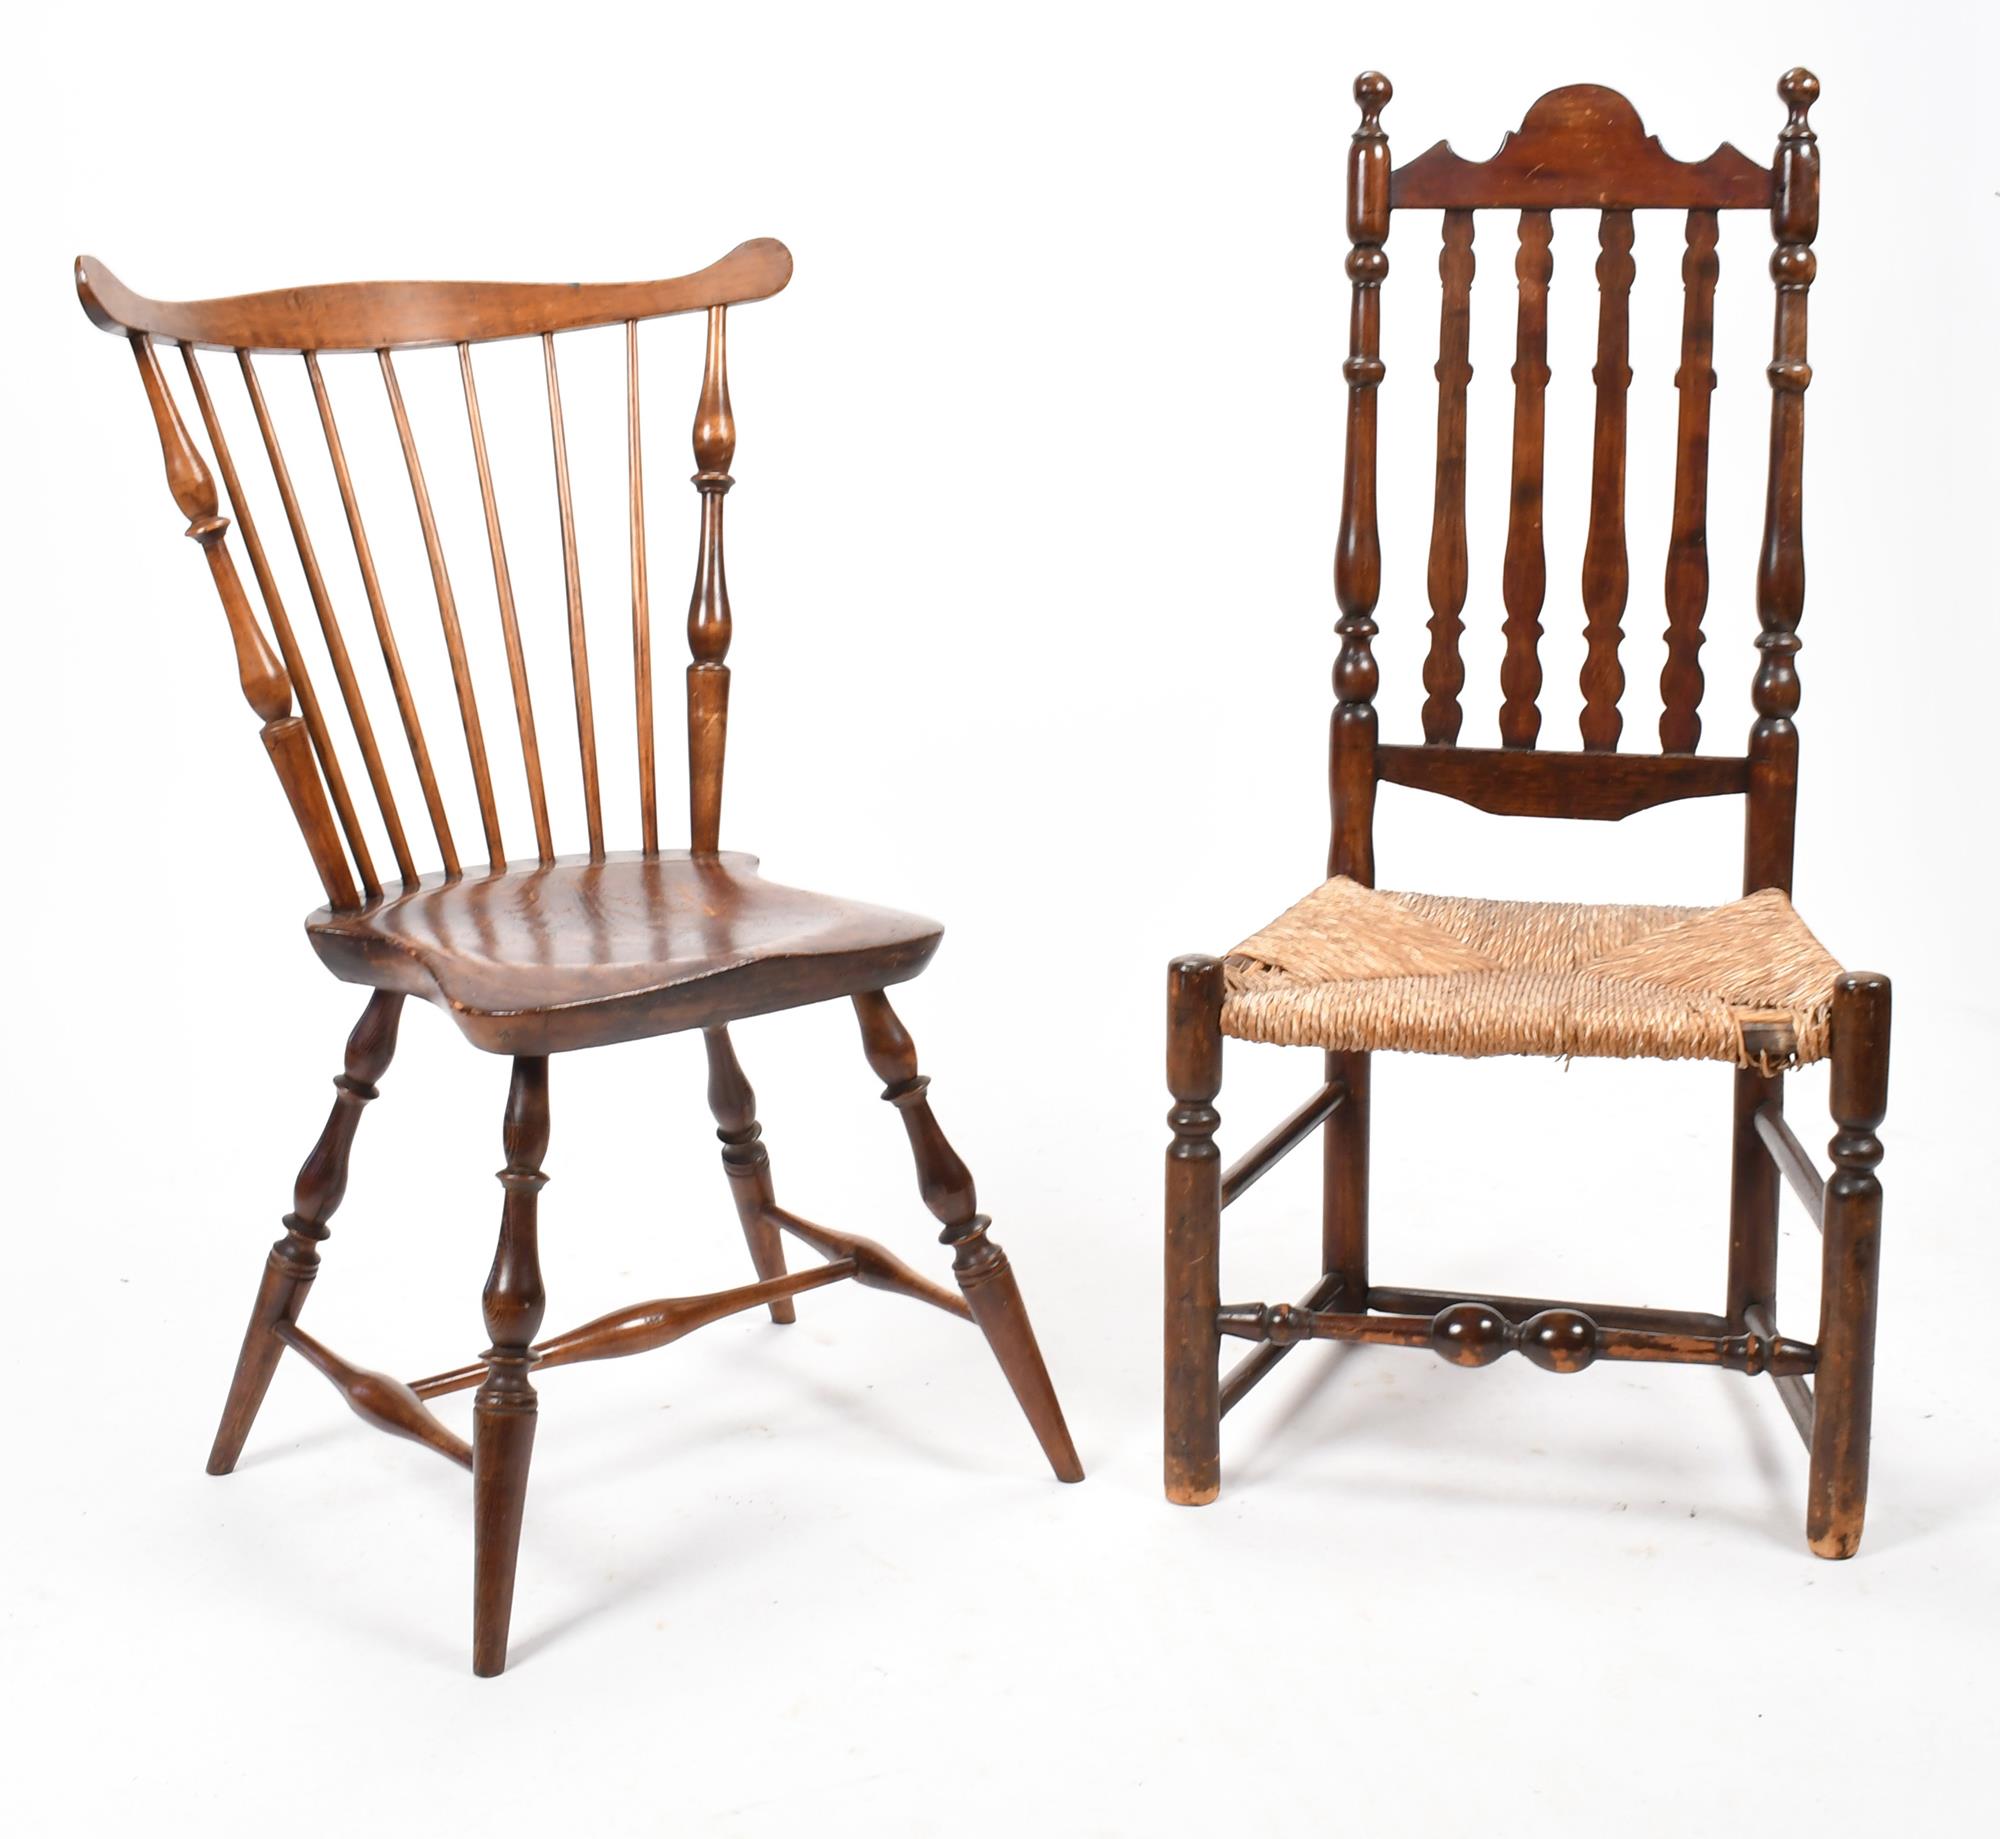 TWO 18TH C AMERICAN CHAIRS A 3acc6b